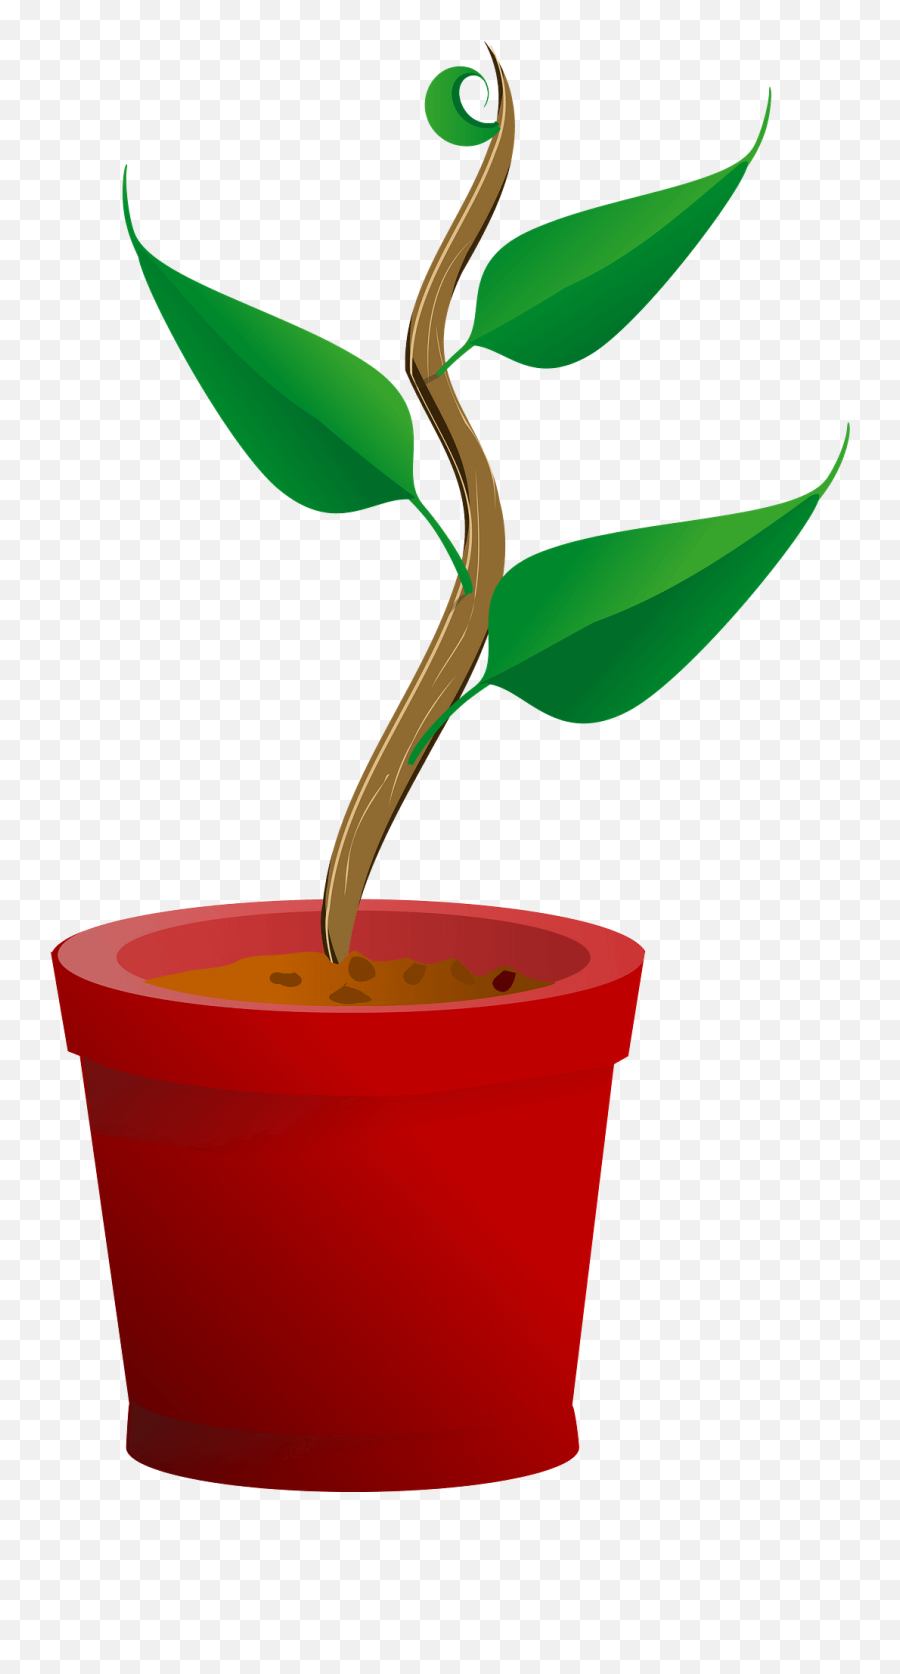 Plant Growing In A Red Pot Clipart Free Download - Genetic Modification Plants Emoji,Flower Pot Clipart